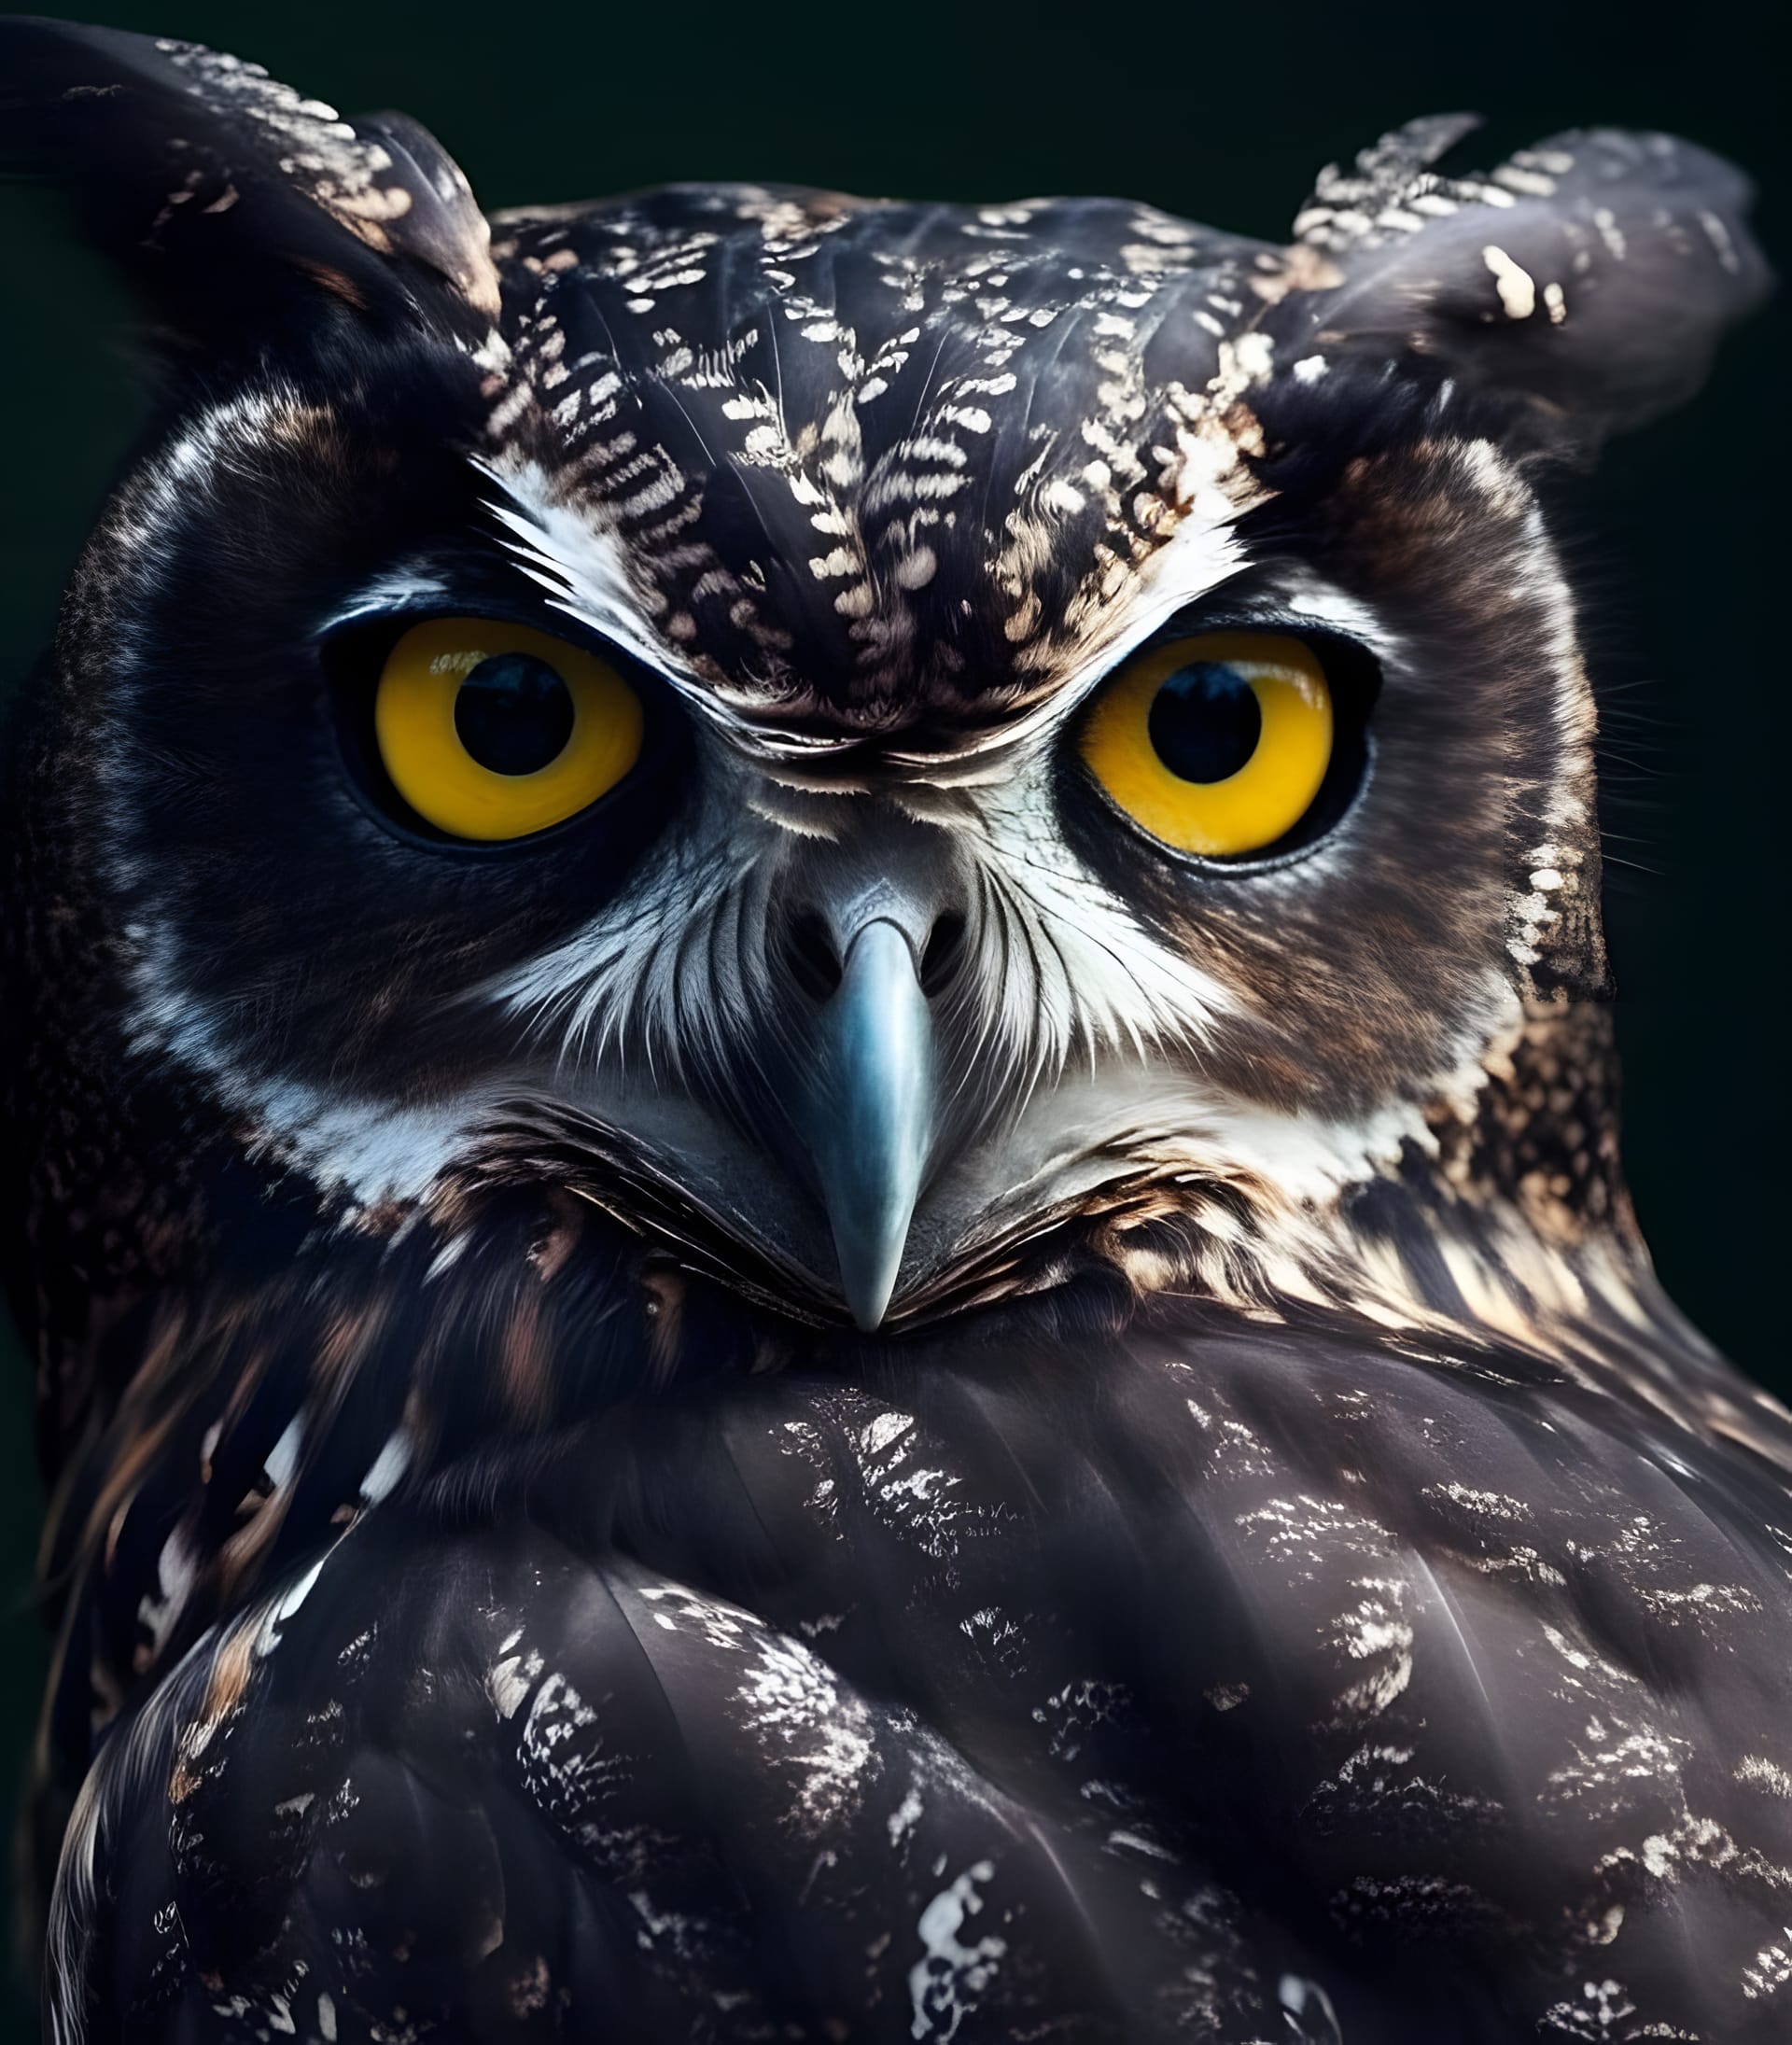 Close up owls face with yellow eyes